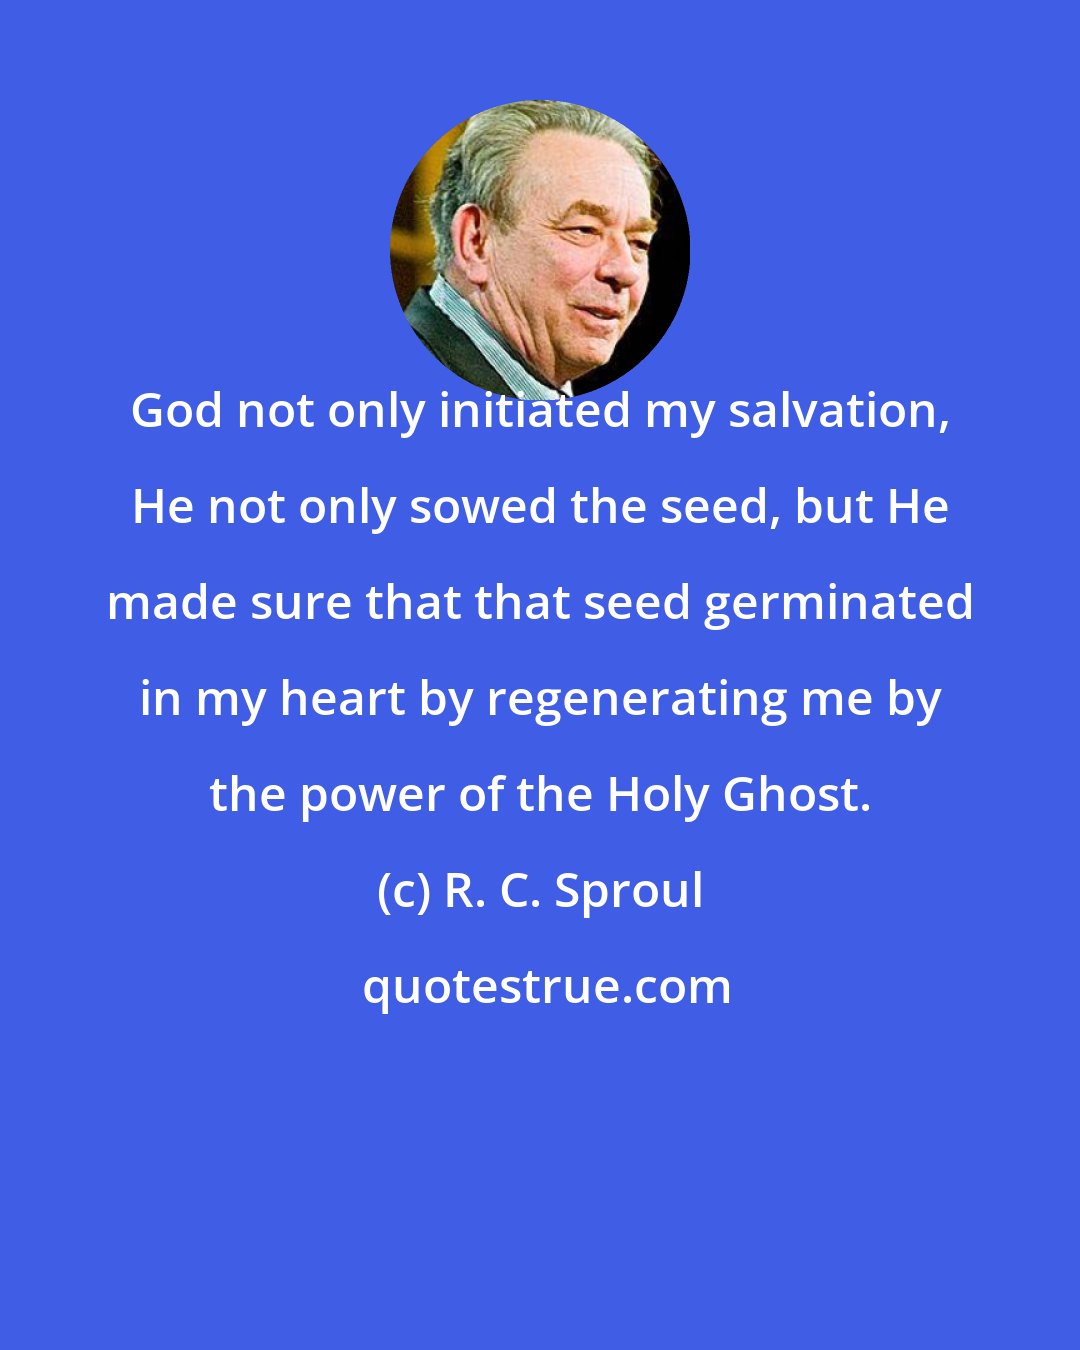 R. C. Sproul: God not only initiated my salvation, He not only sowed the seed, but He made sure that that seed germinated in my heart by regenerating me by the power of the Holy Ghost.